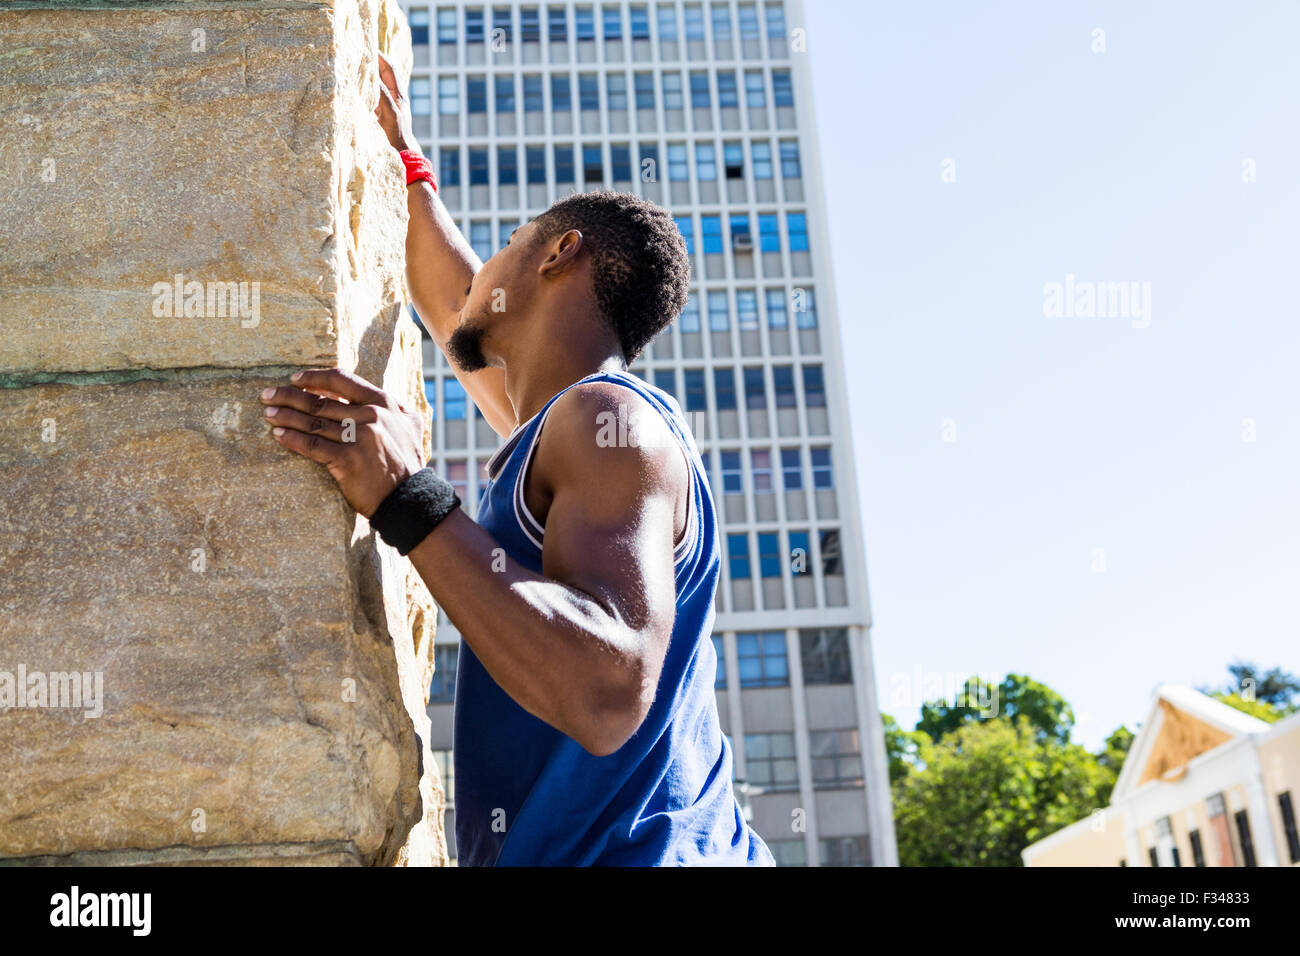 Extreme athlete gripping to wall Stock Photo